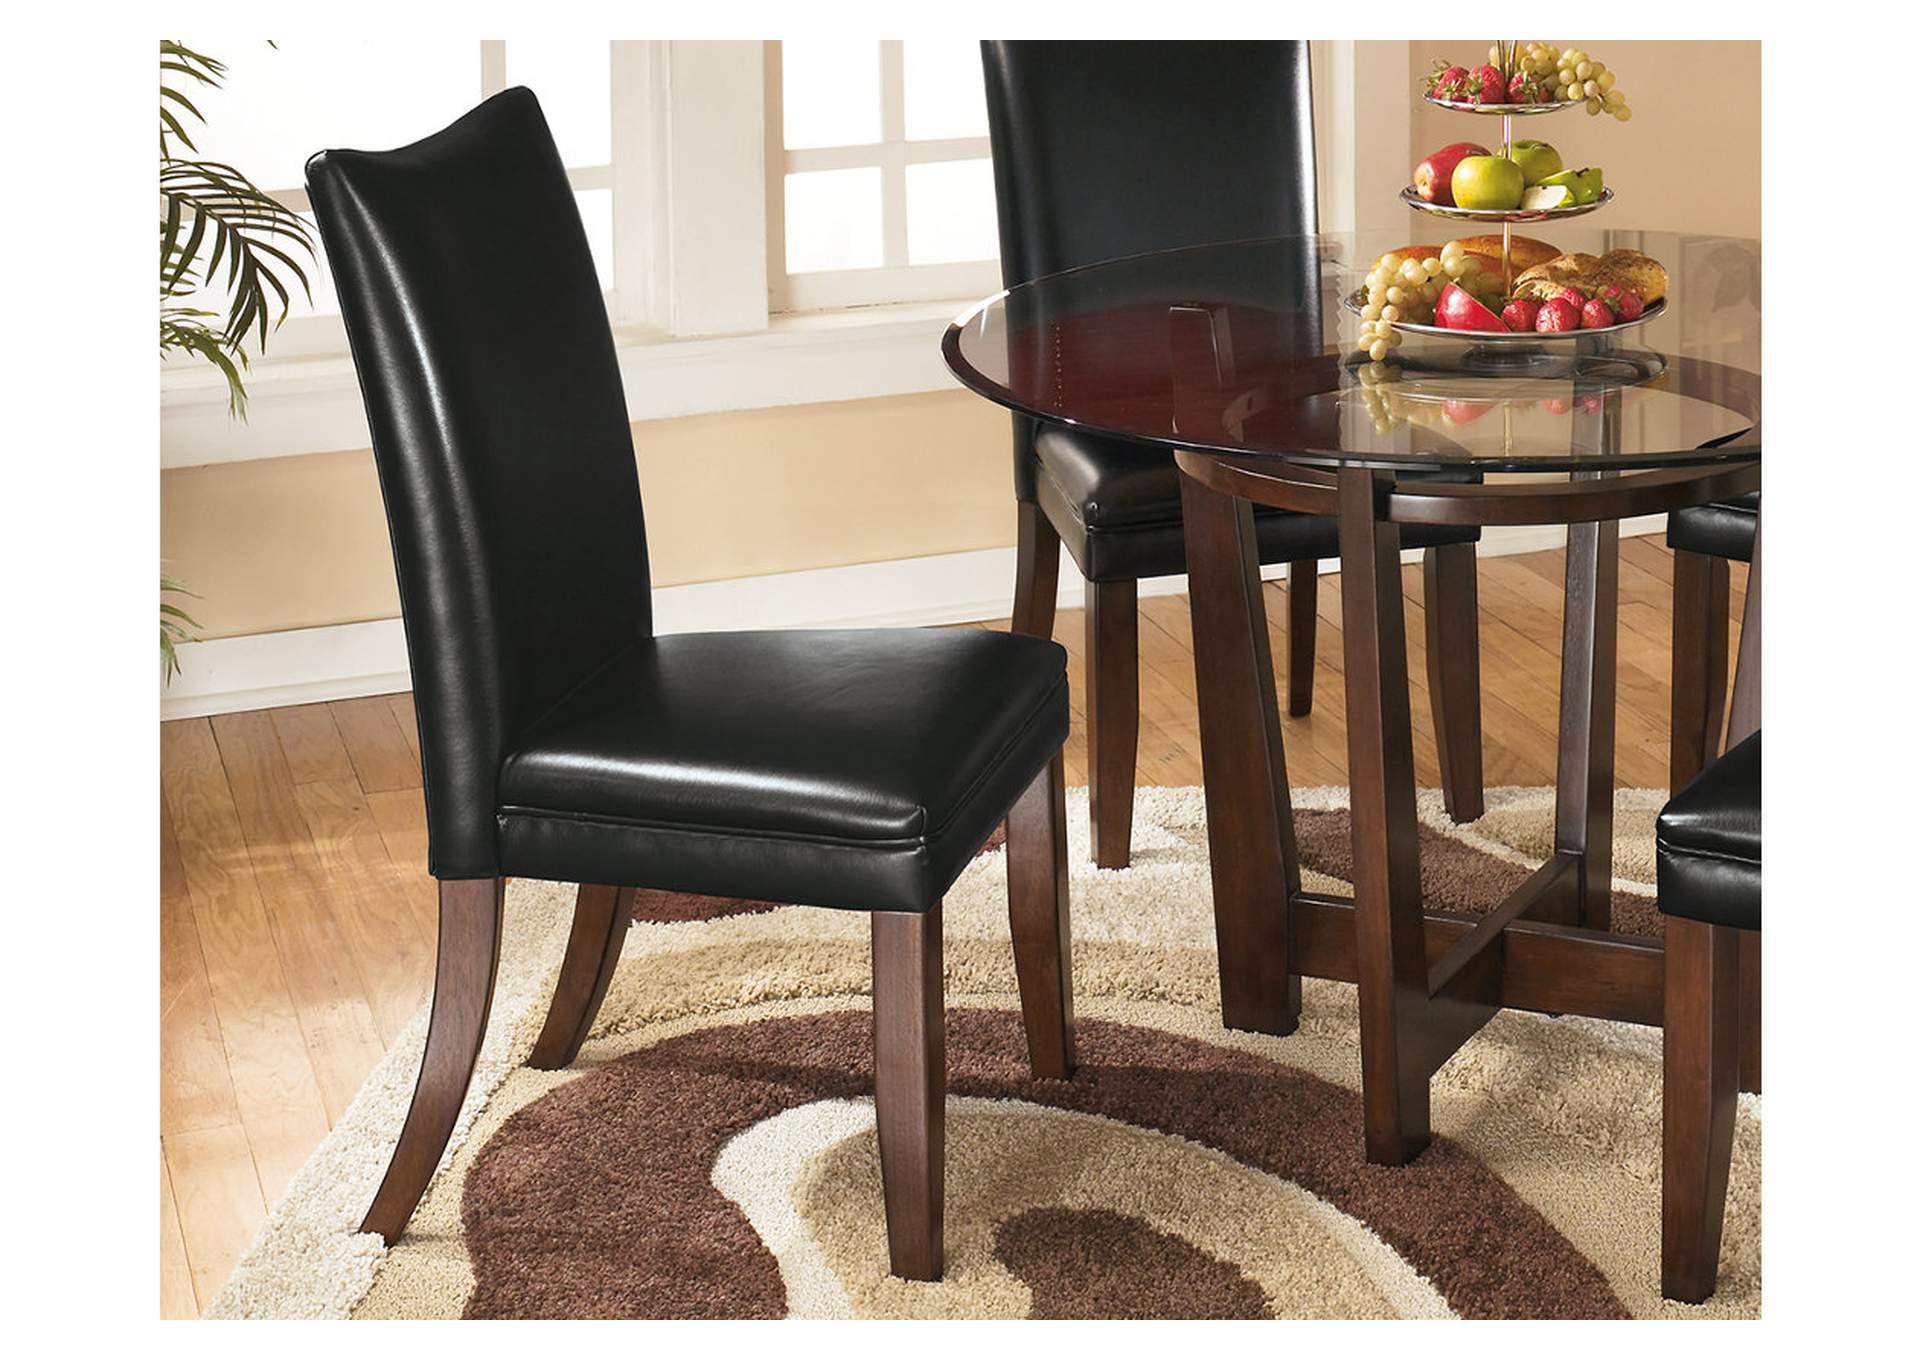 Laughlin Furniture Shelby Nc Charrell Black Side Chairs Set Of 2